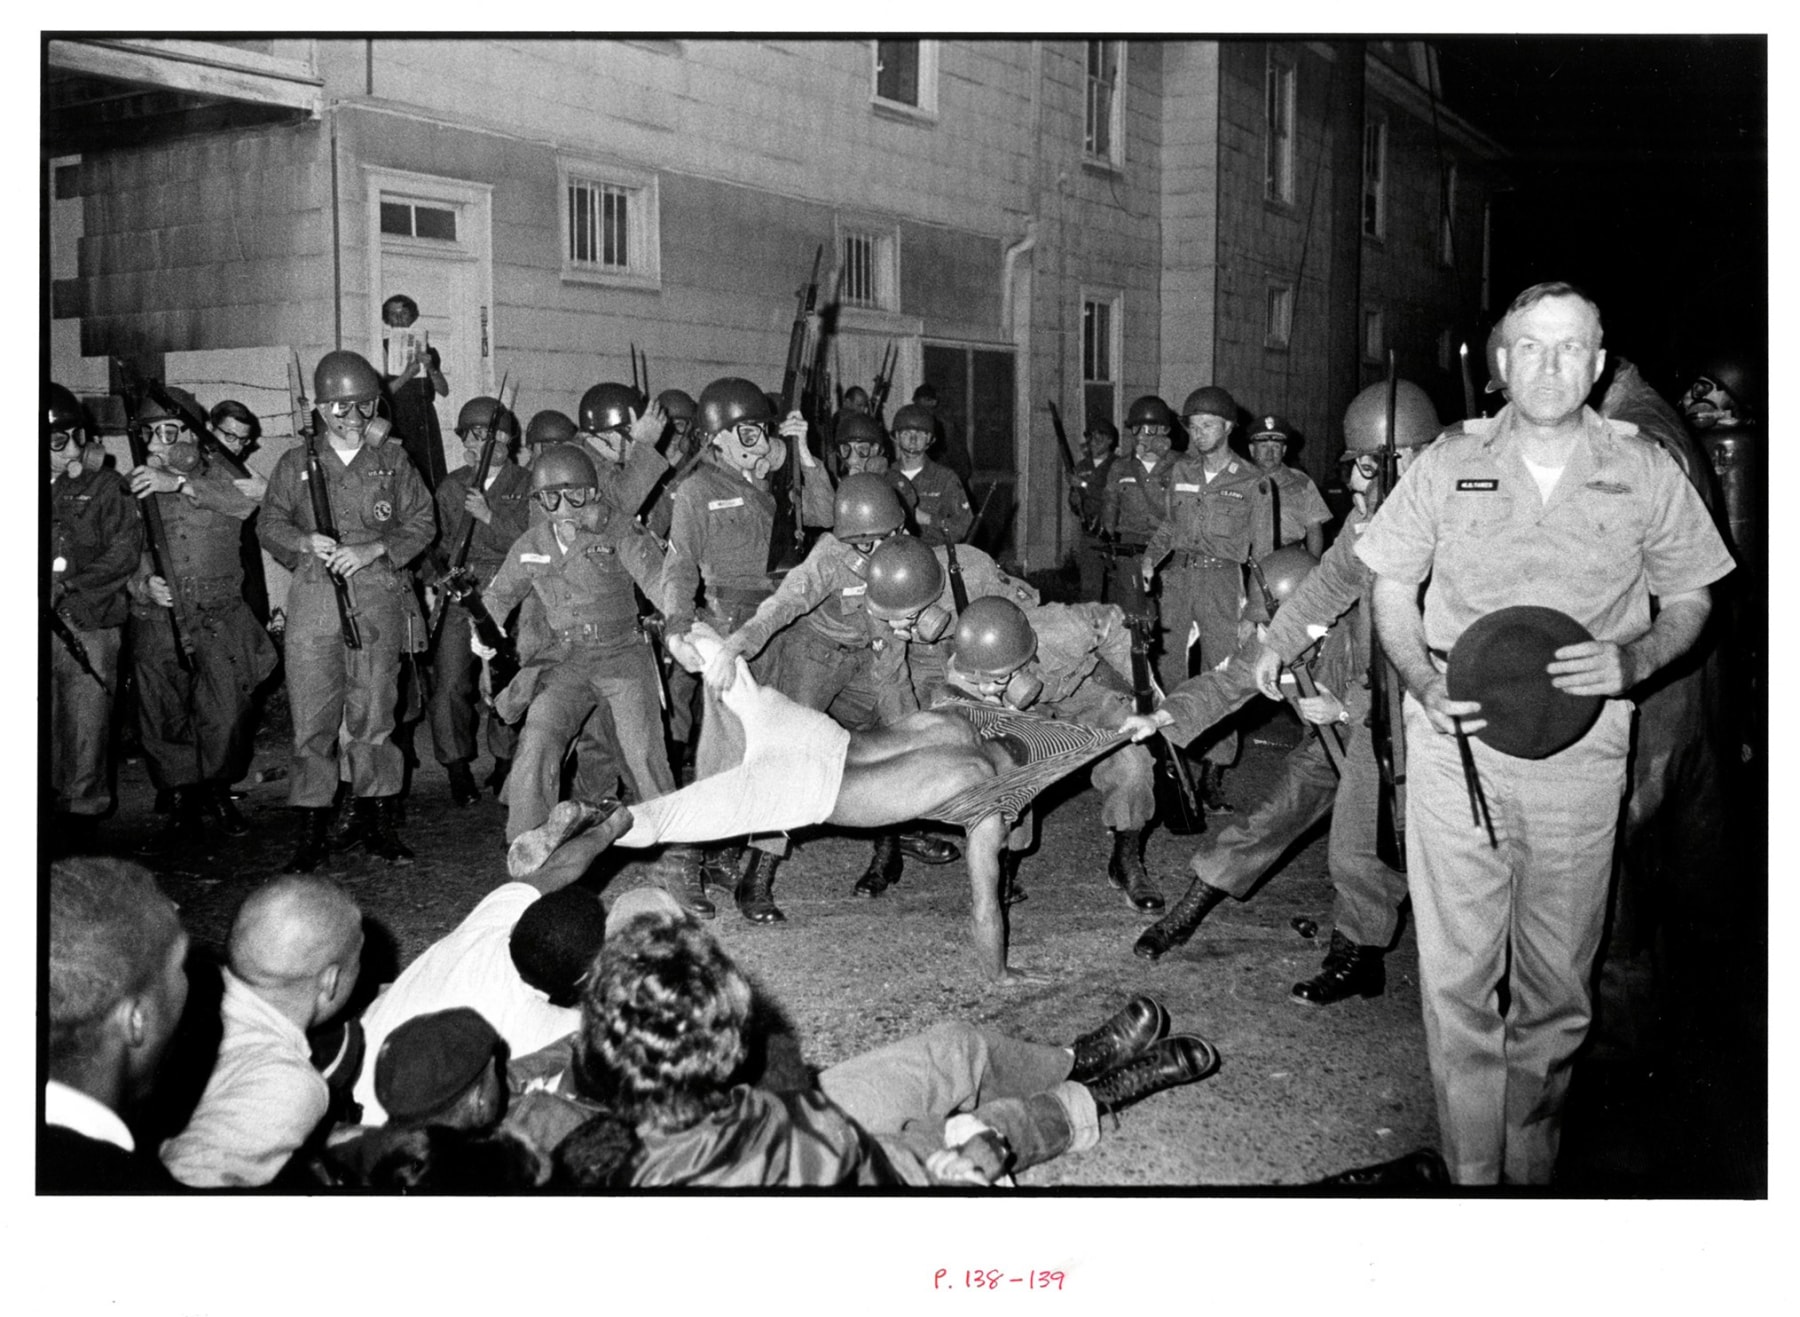 Copyright Danny Lyon / Magnum Photos, Cliff Vaughs, SNCC photographer, Arrested, Cambridge MD Spring,&nbsp;from Memories of The Southern Civil Rights Movement, 1964